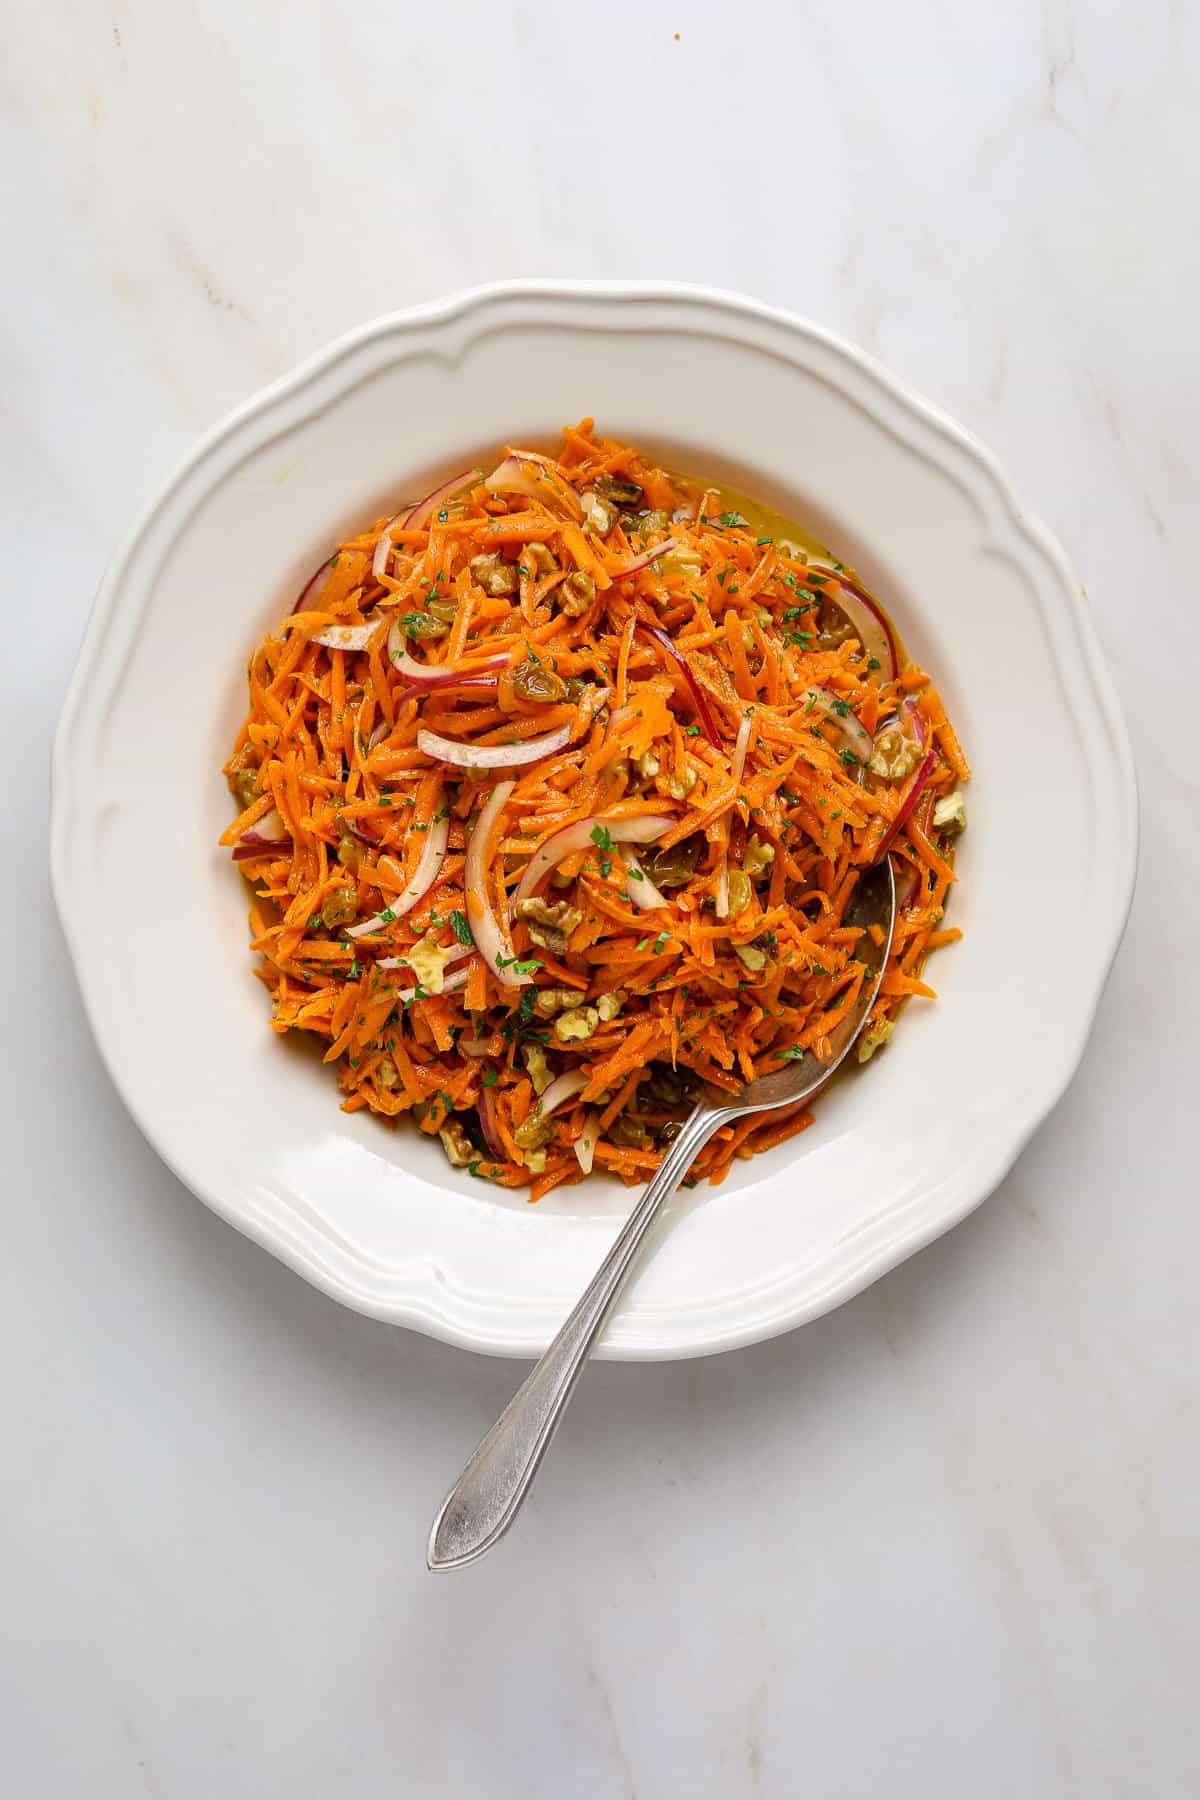 Carrot Salad with Toasted Walnuts and Golden Raisins